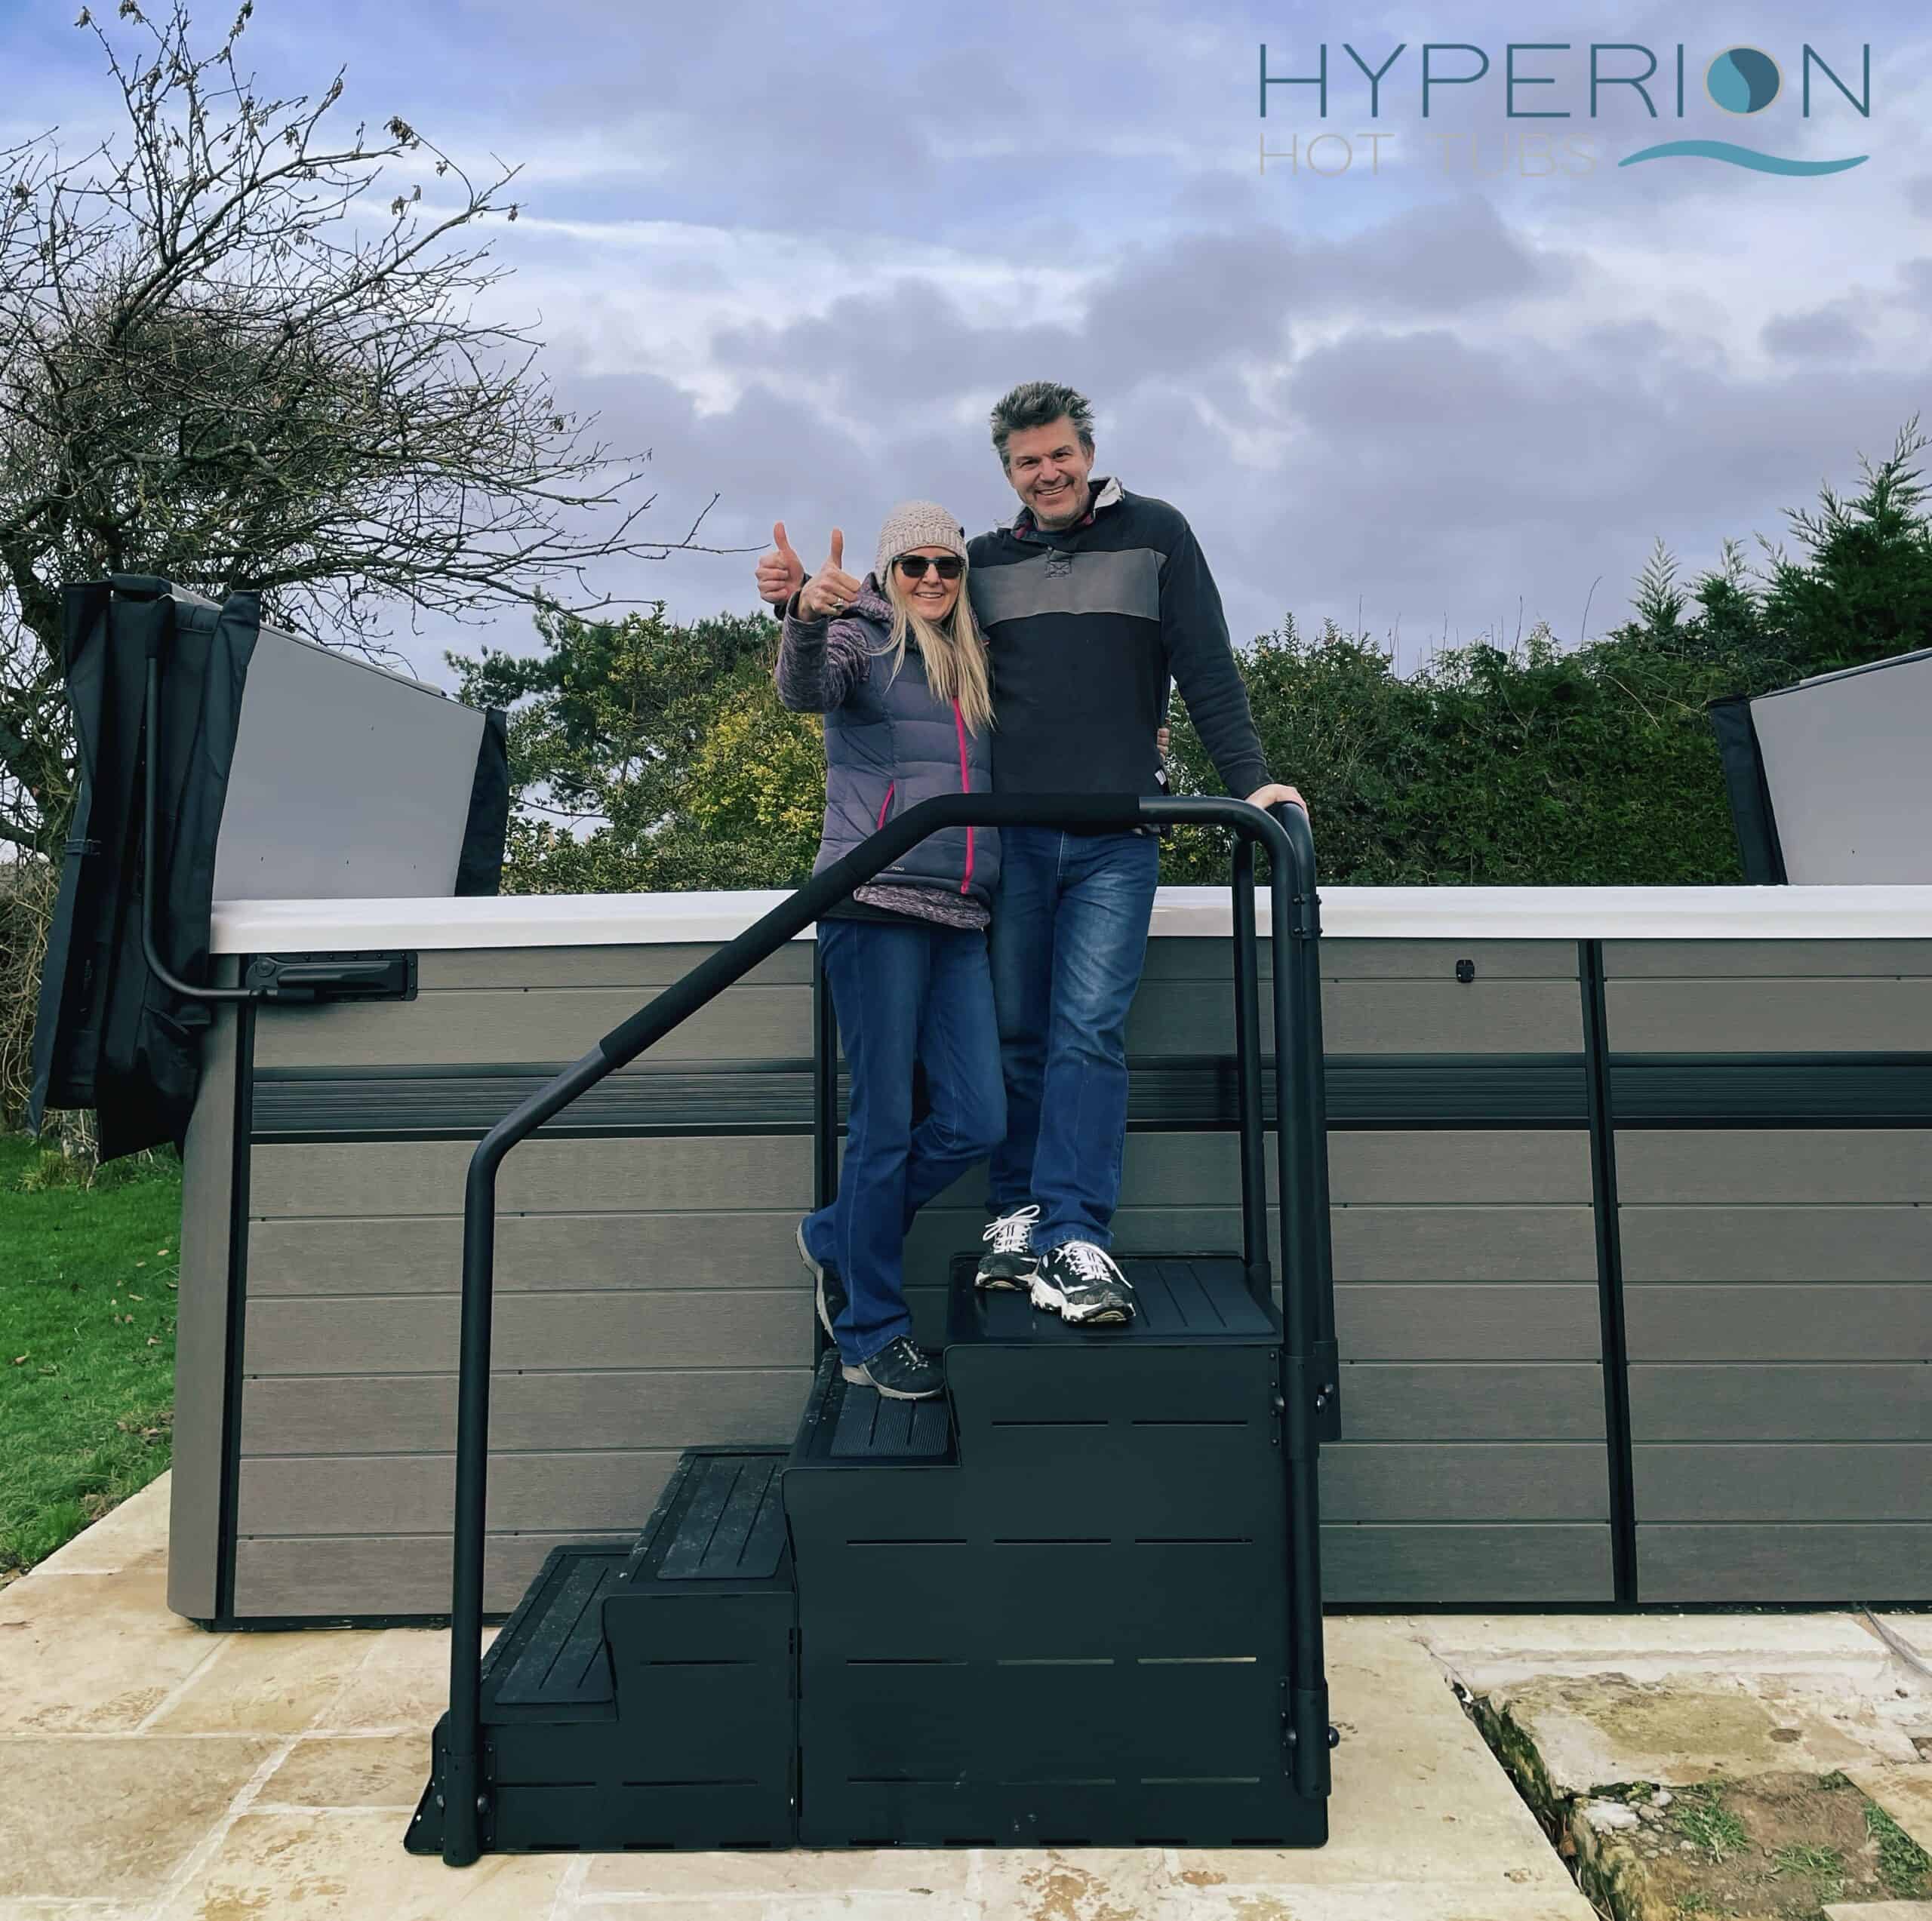 Buying a swim spa results in more happy customers at Hyperion Hot Tubs